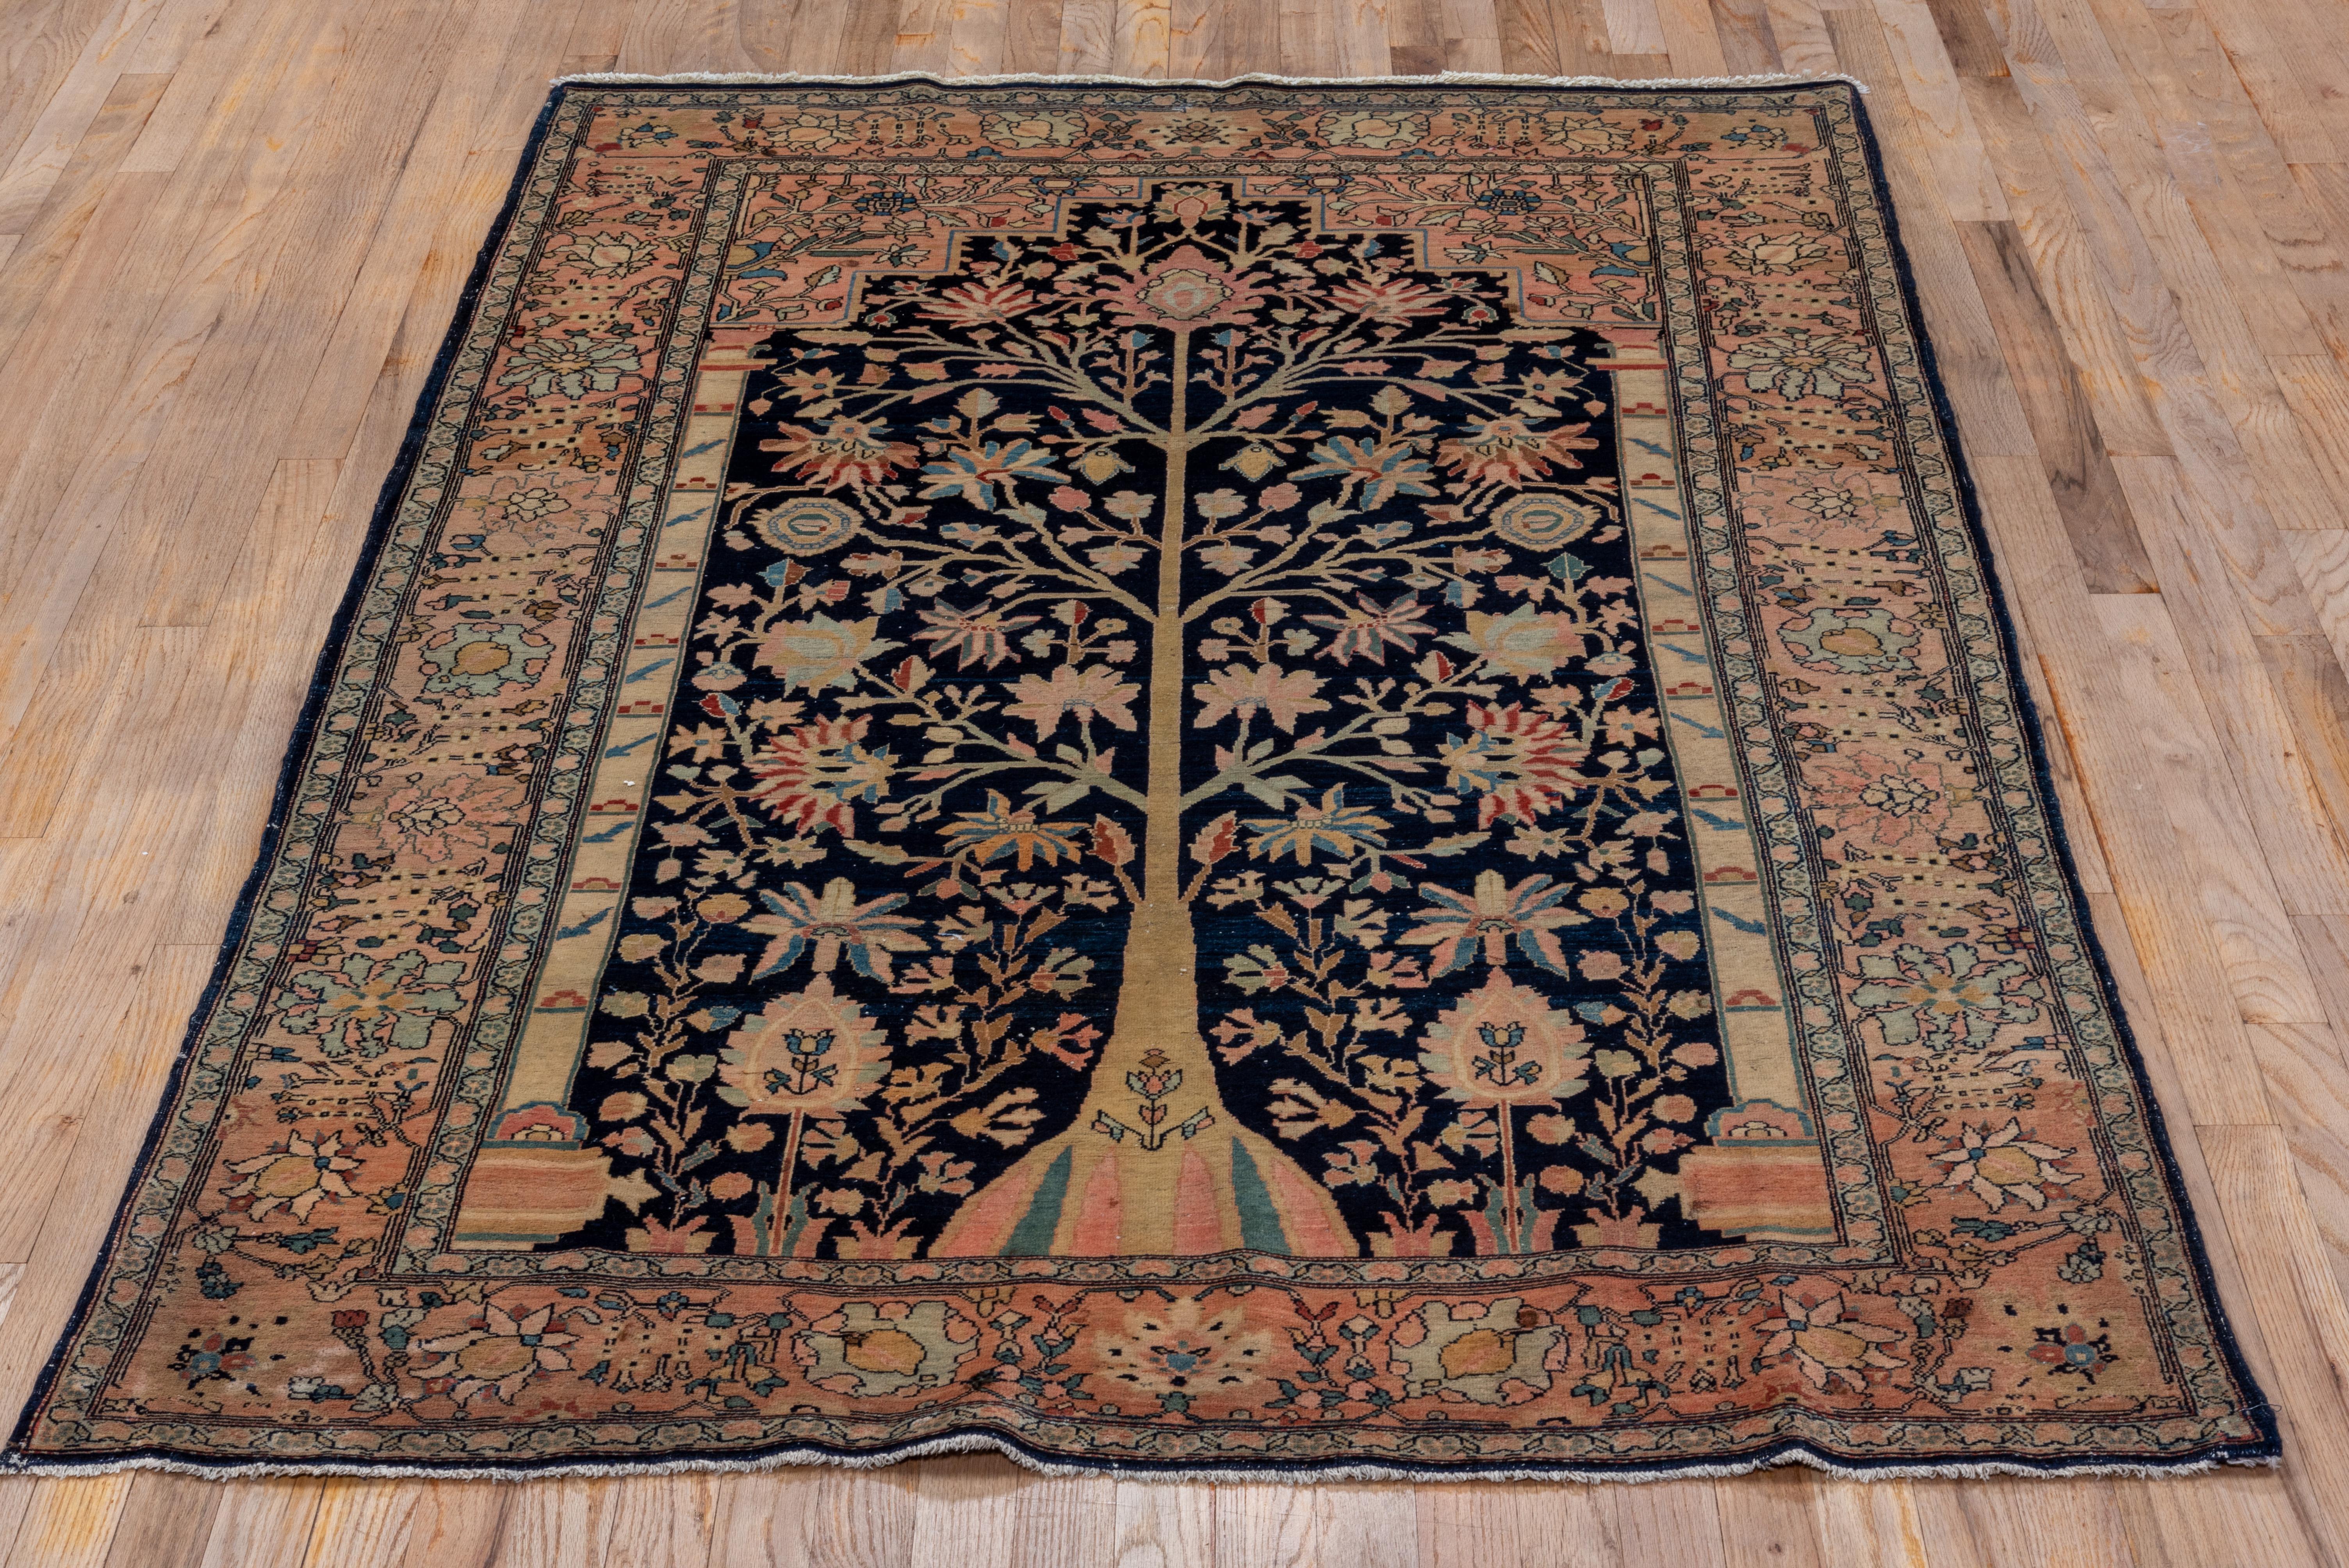 Antique Persian Farahan Sarouk Rug, Tree of Life Design, Pink and Teal Accents In Good Condition For Sale In New York, NY